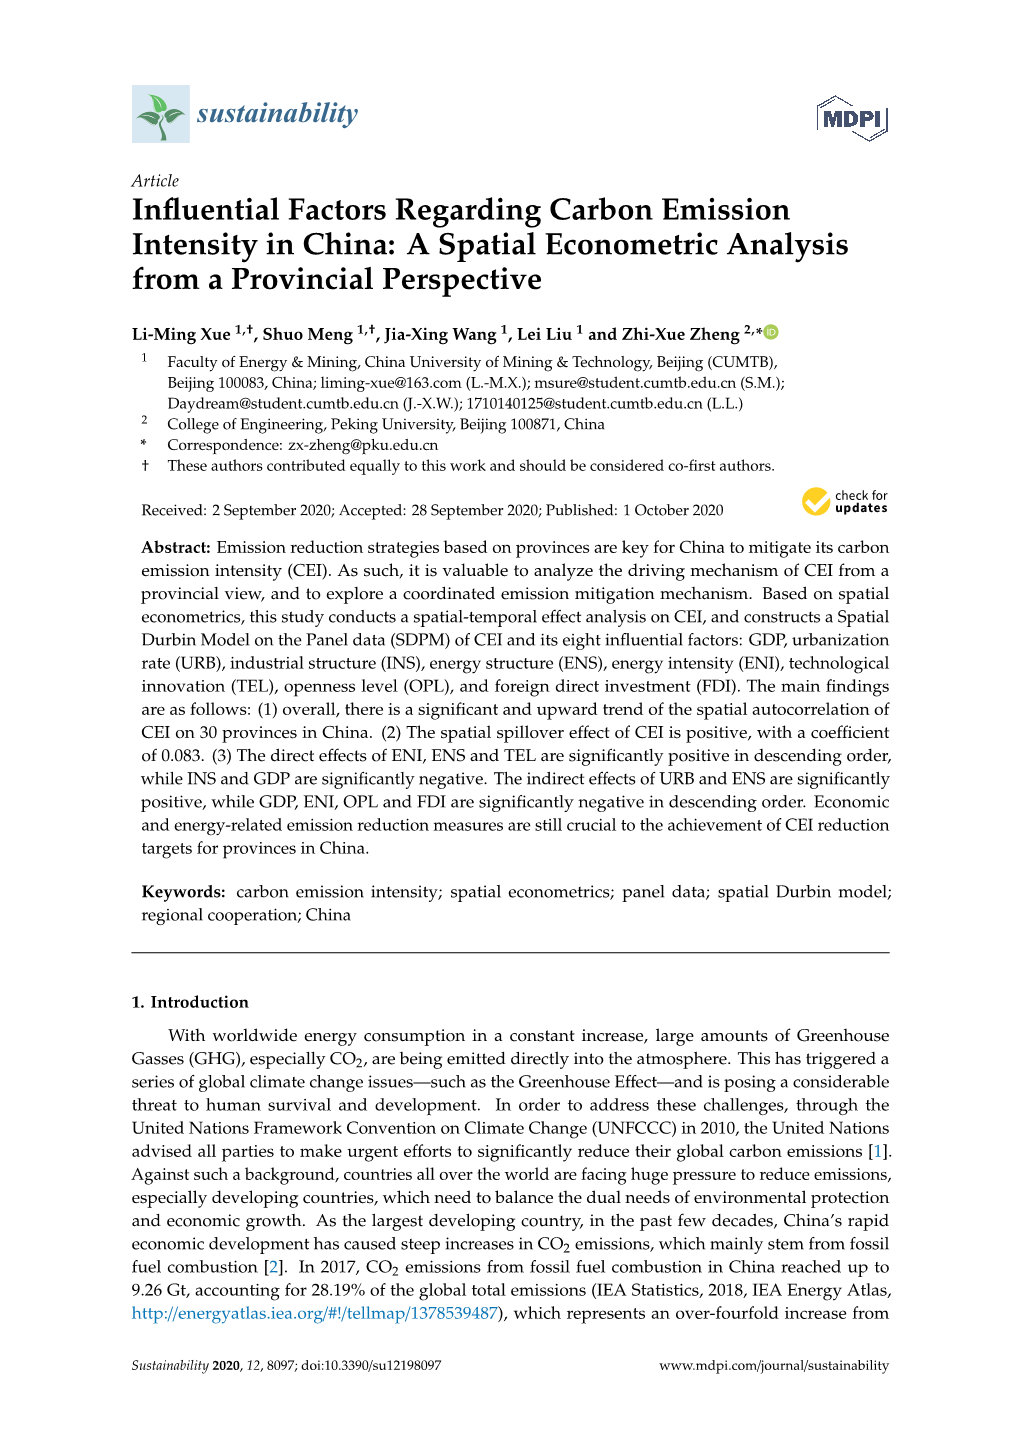 Influential Factors Regarding Carbon Emission Intensity in China: A